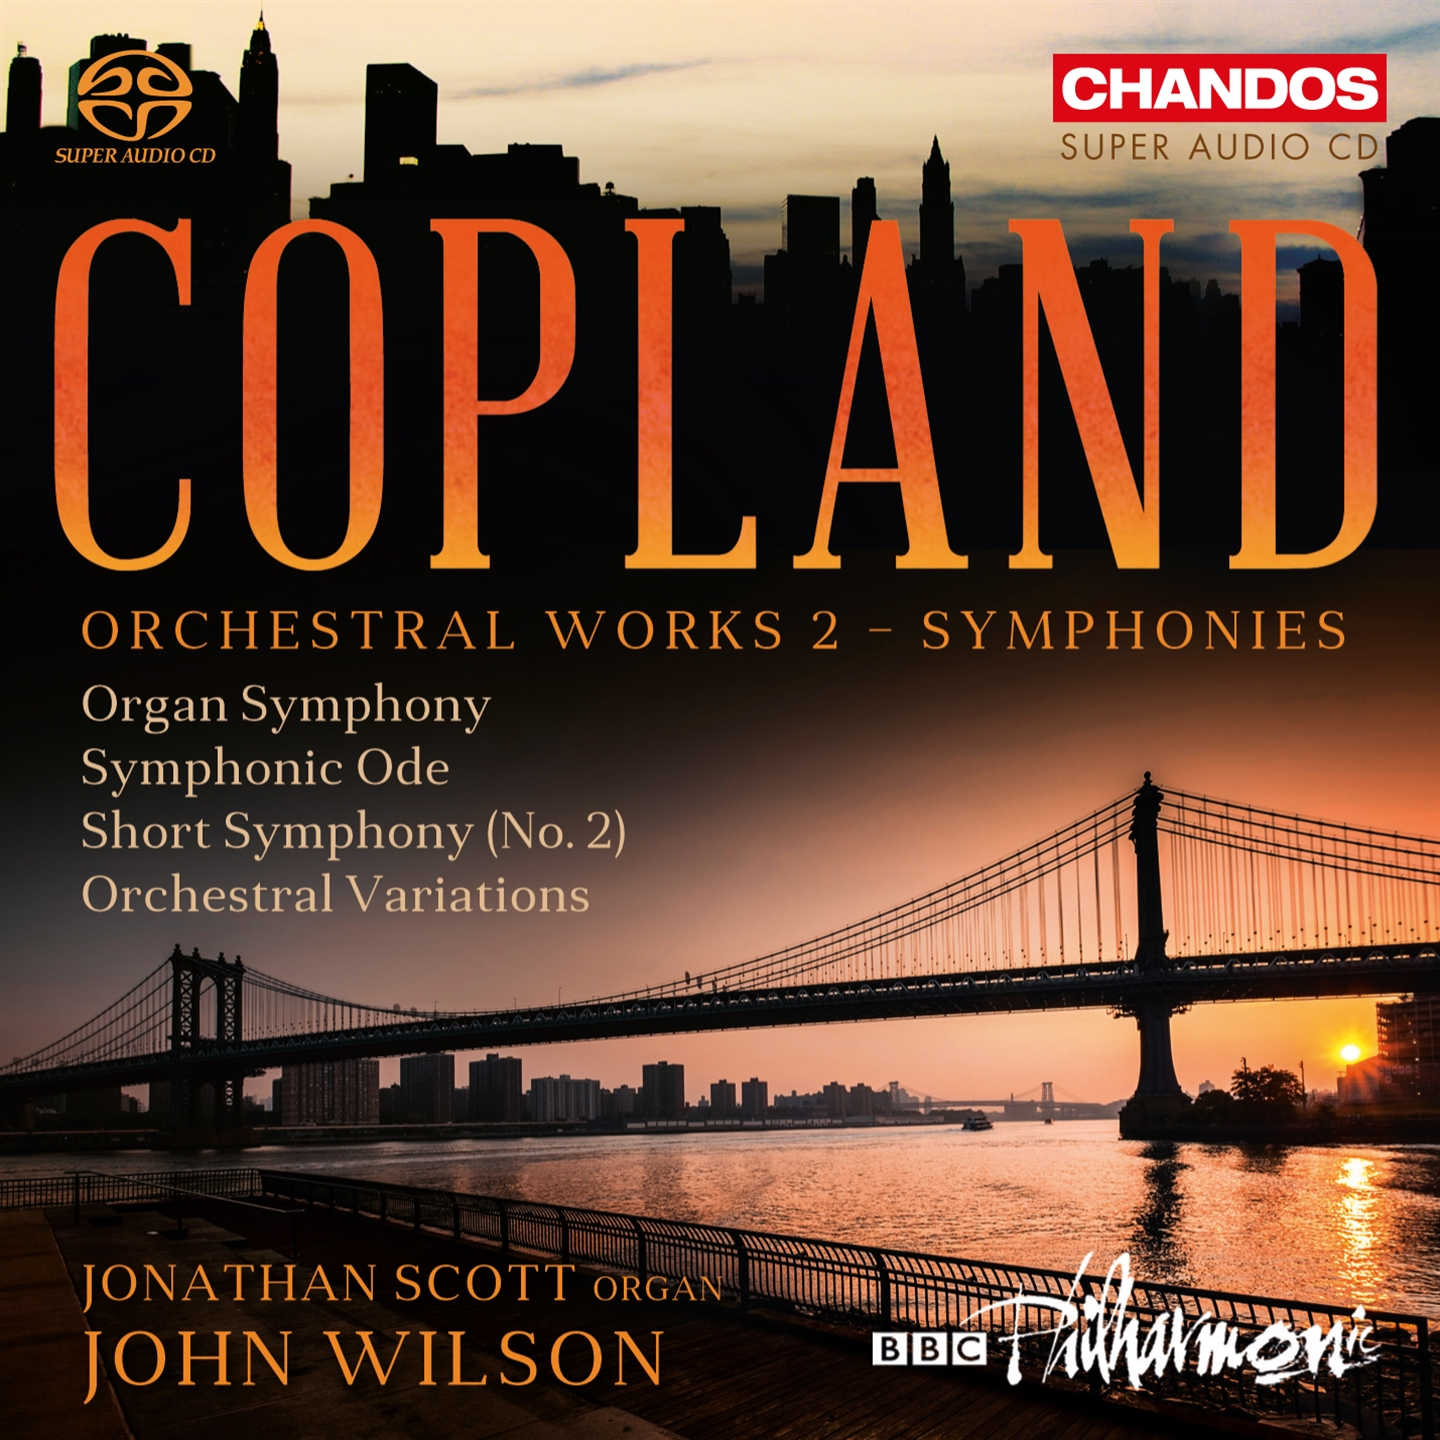 COPLAND: ORCHESTRAL WORKS VOL.2